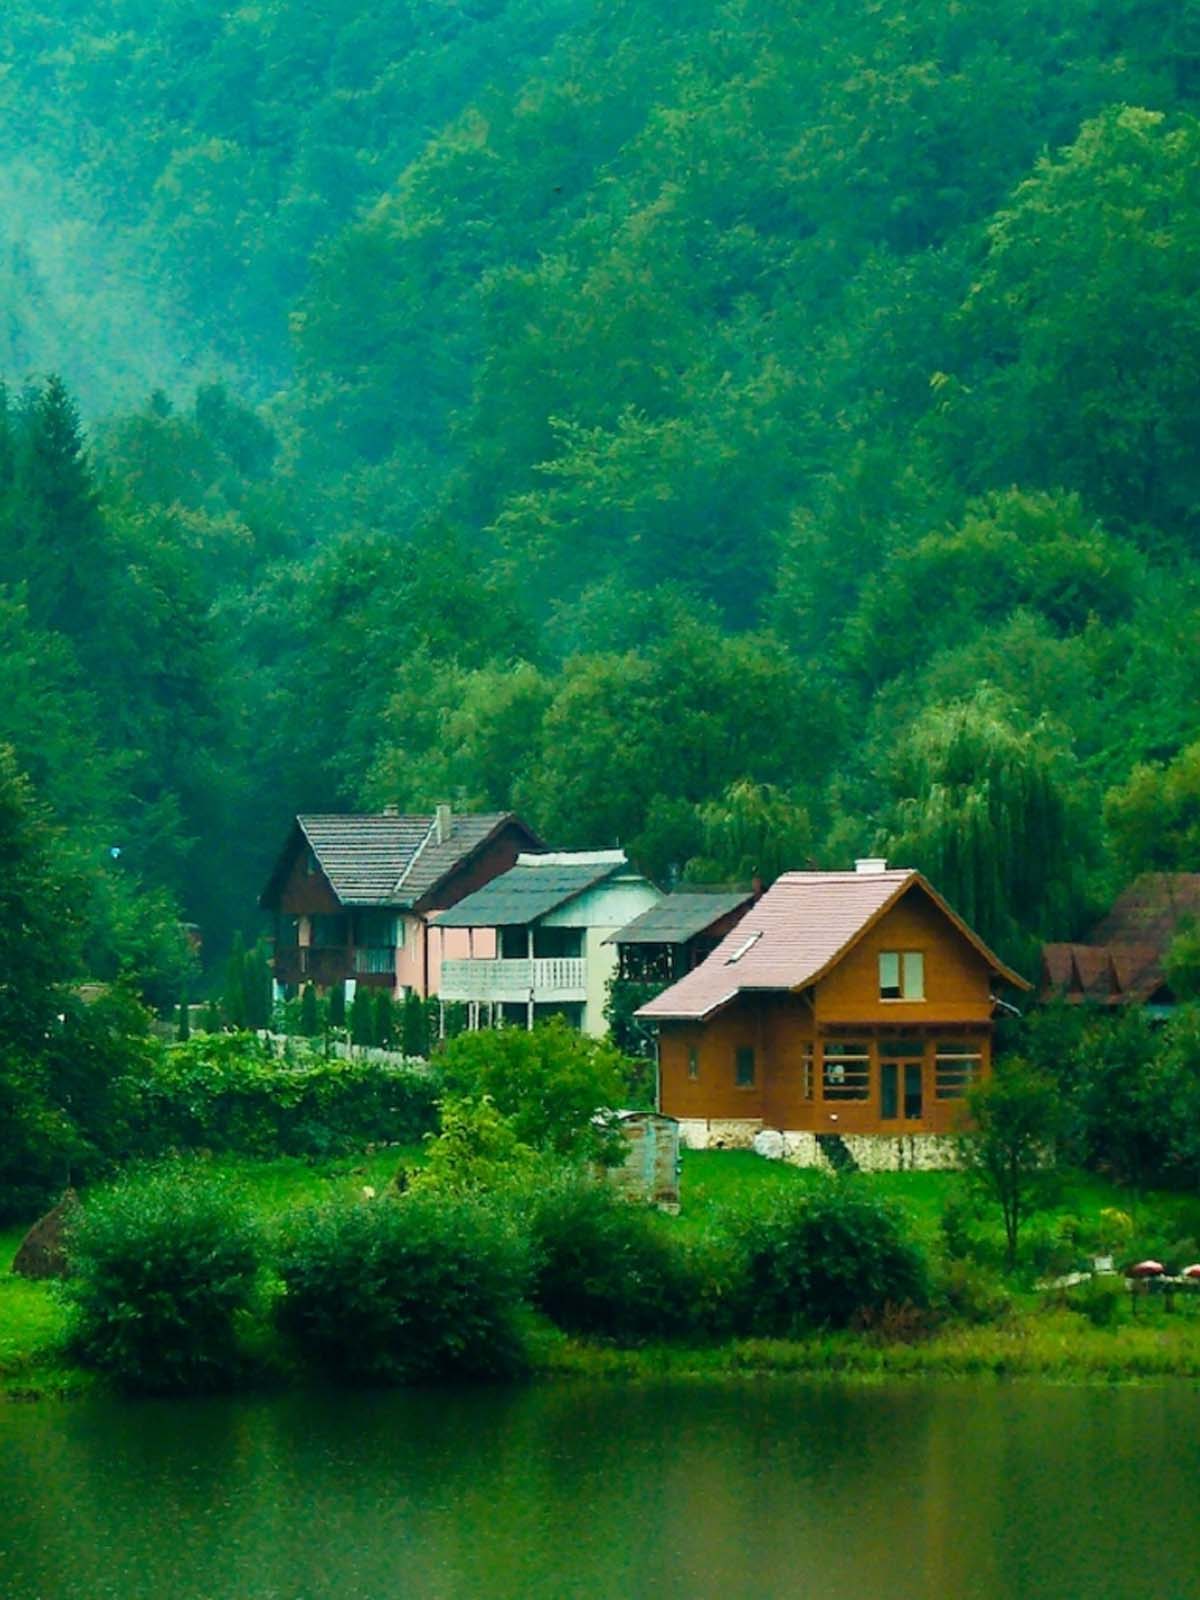 House In Deep Green Forest 4K Ultra HD Mobile Wallpaper